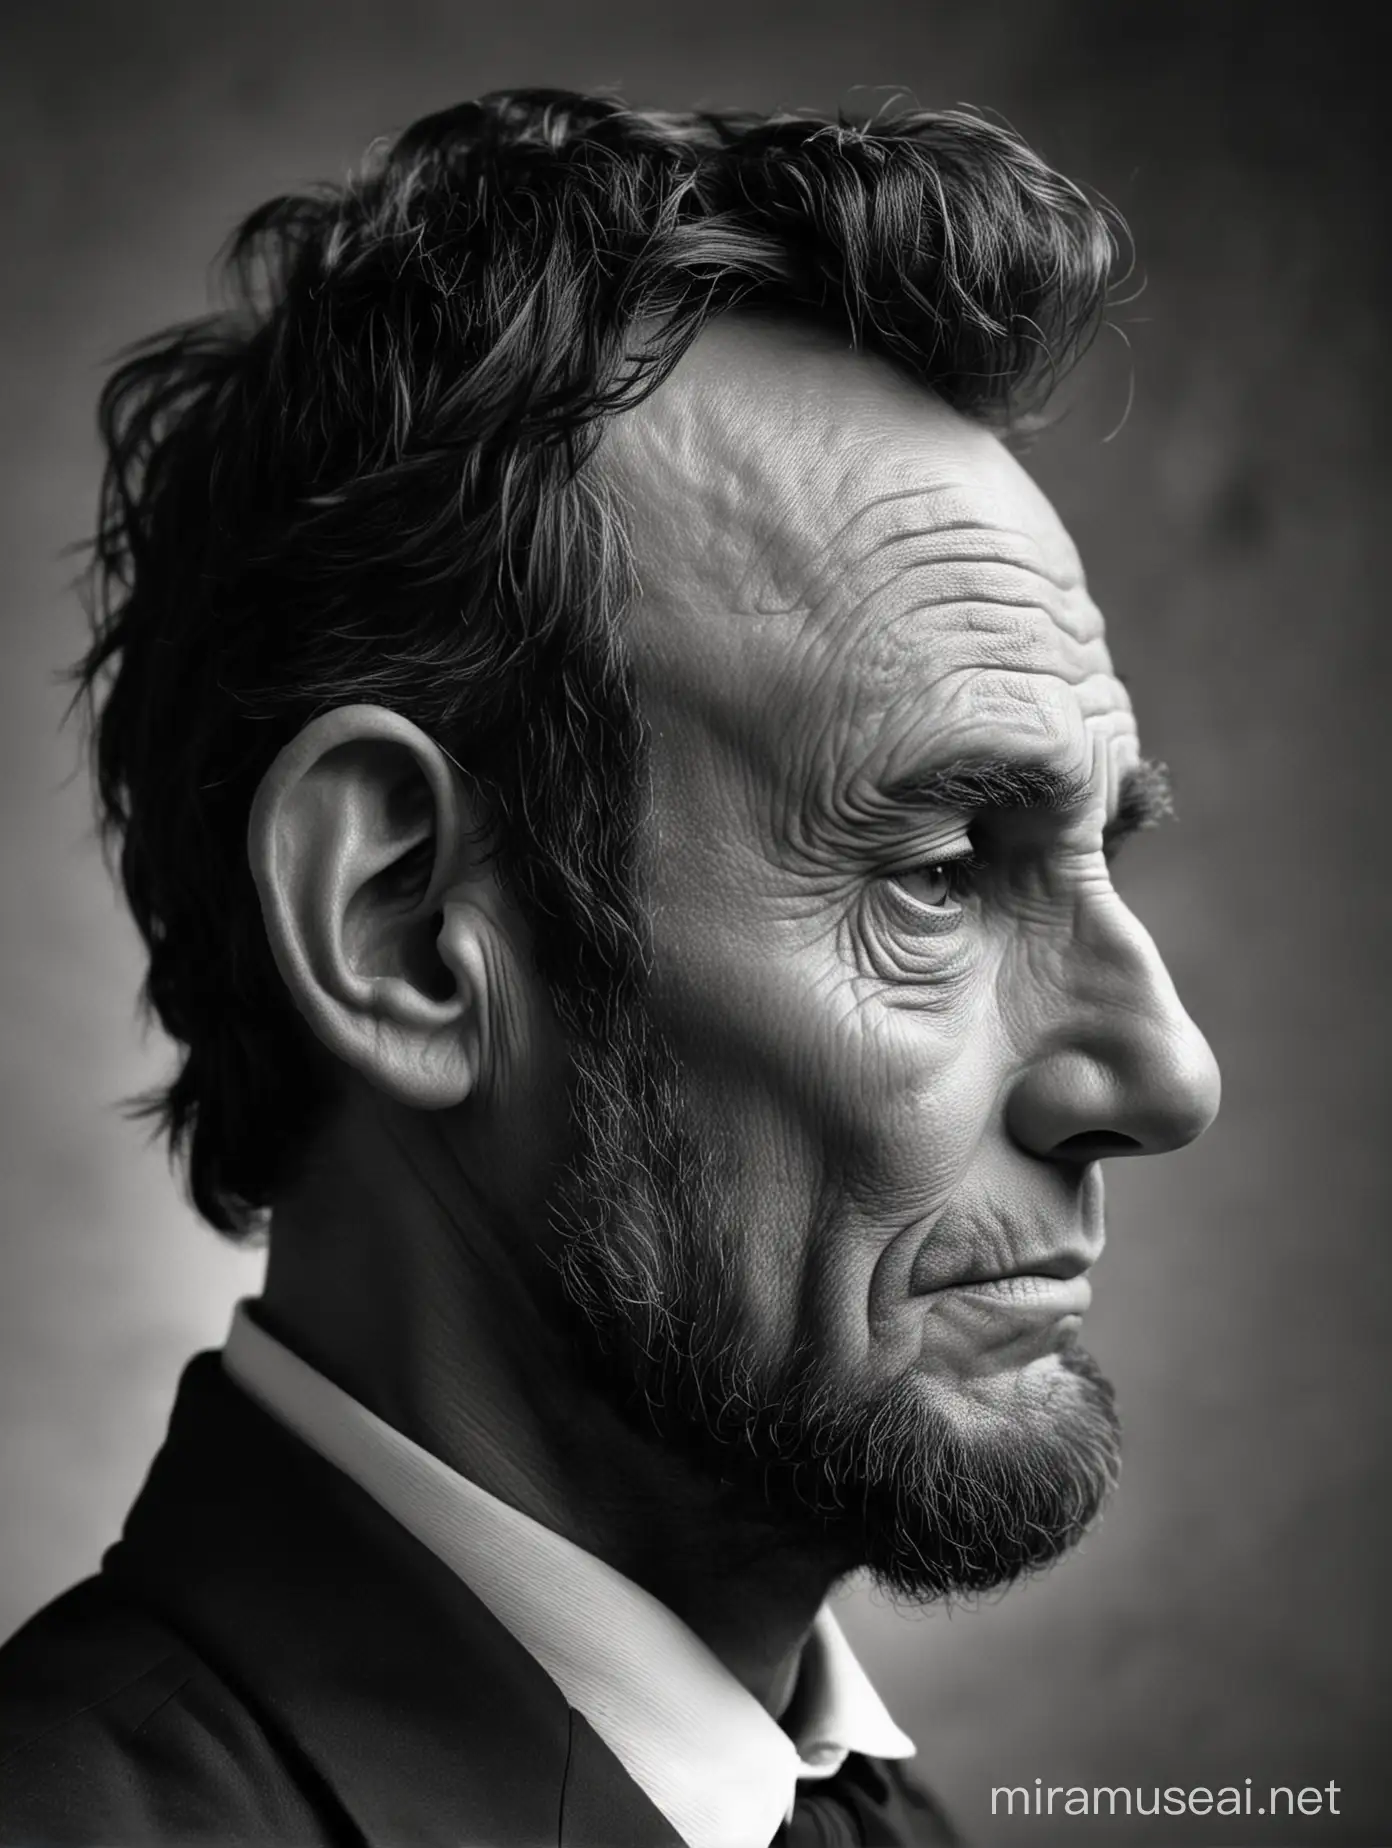 Abraham Lincoln profile in black and white.  A tear is running down his face.